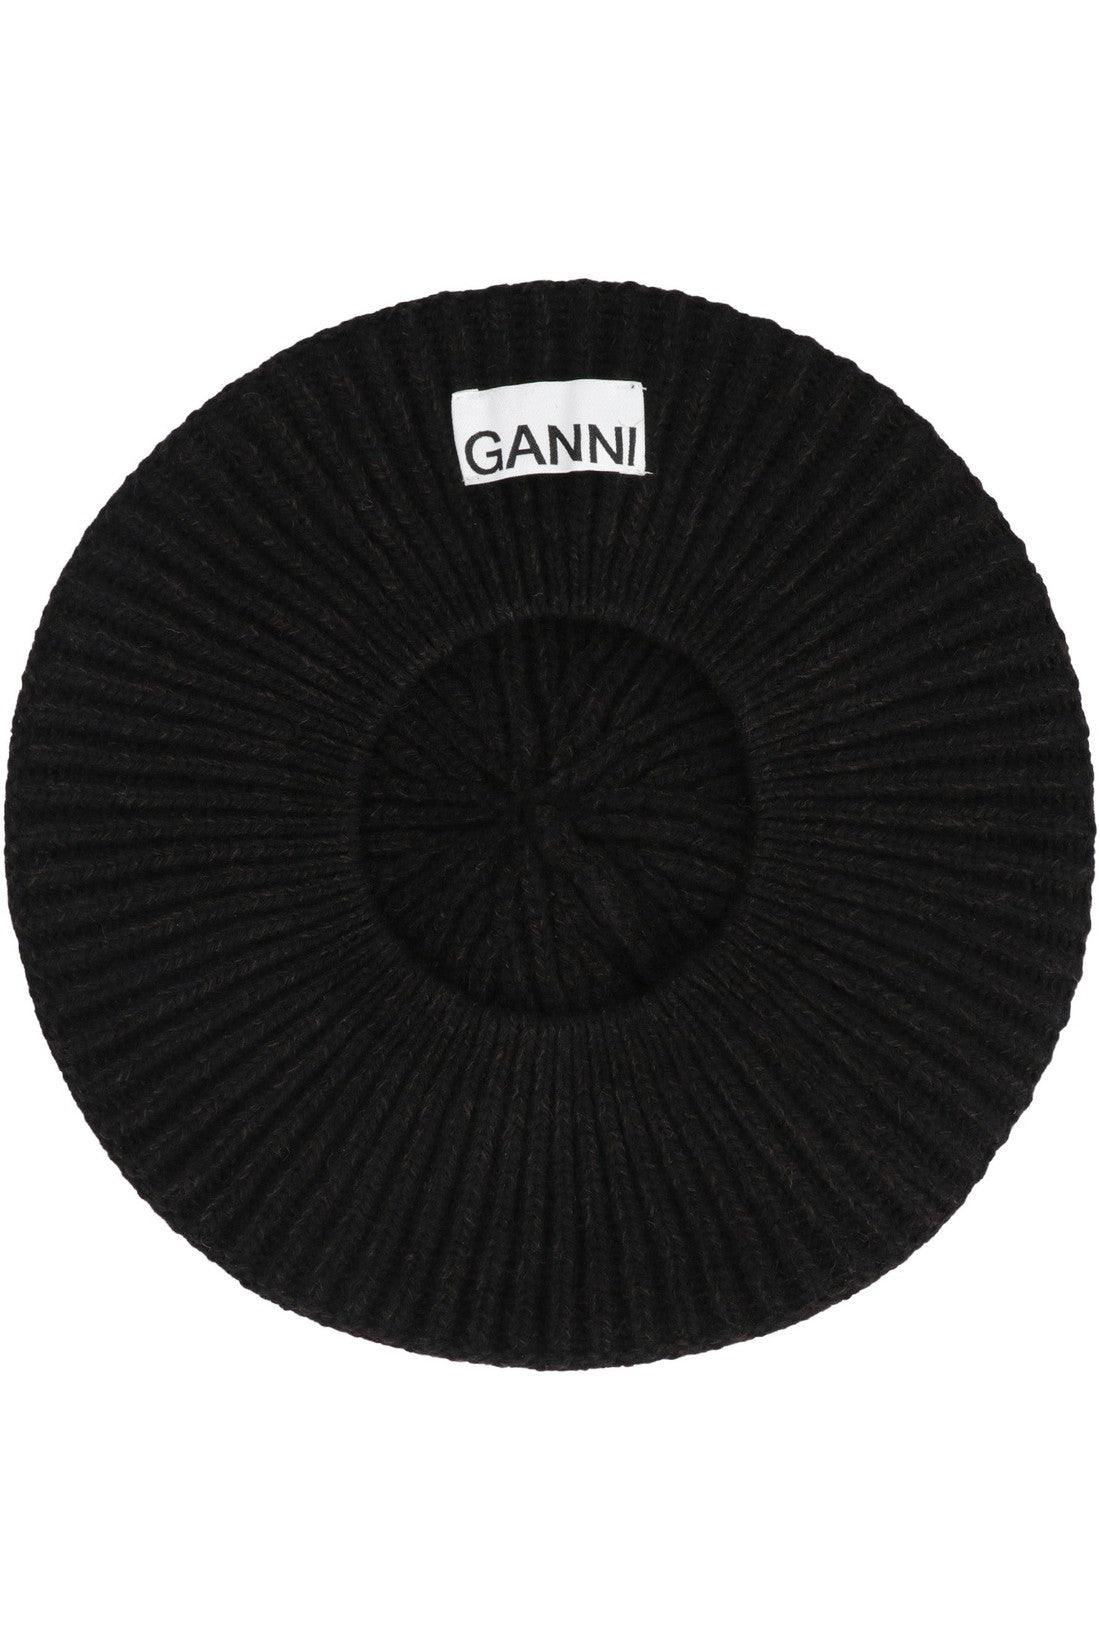 GANNI-OUTLET-SALE-Knitted wool beanie hat-ARCHIVIST